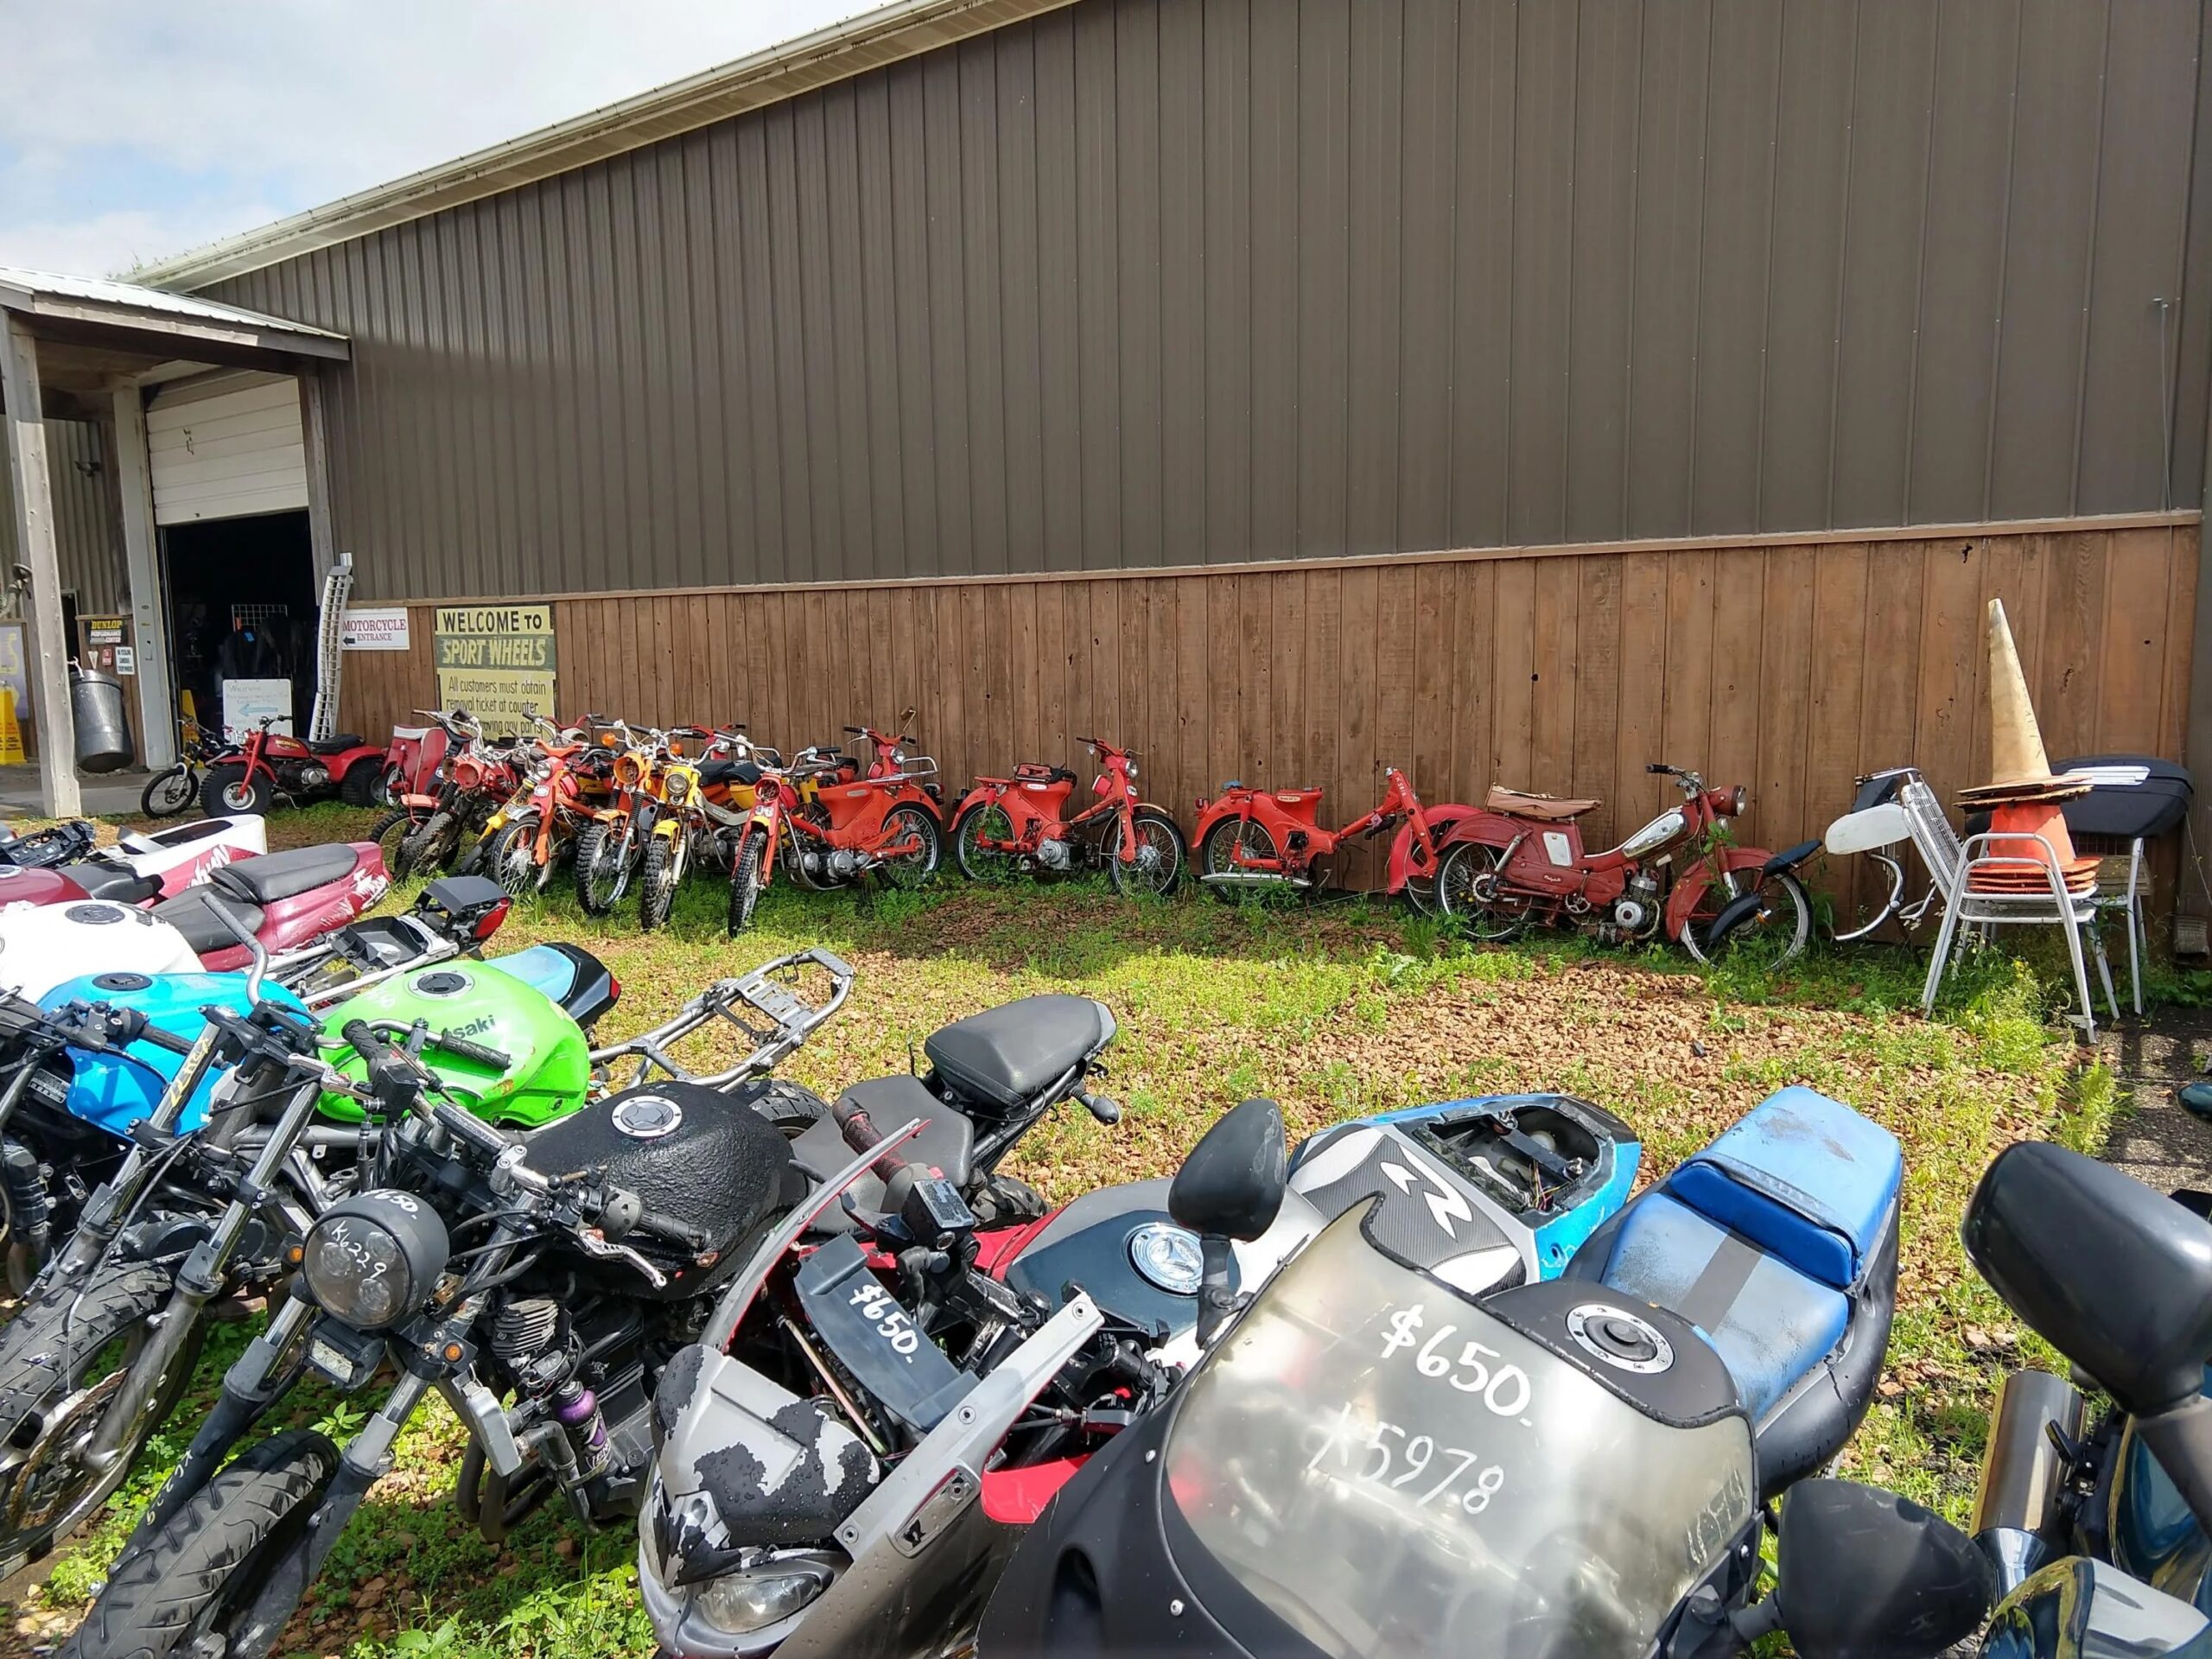 How Does a Honda Motorcycle Salvage Operate